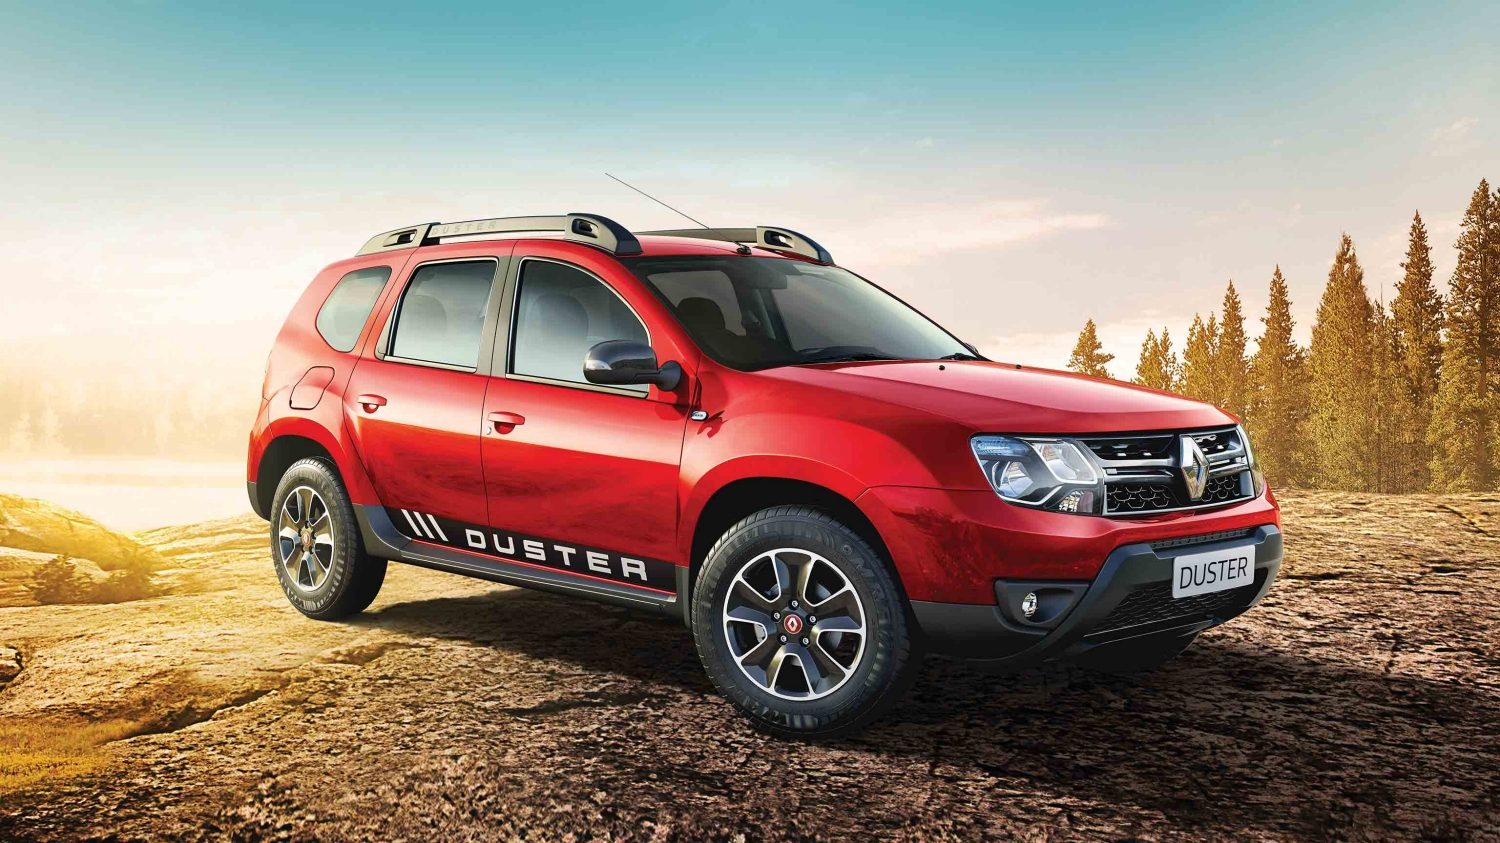 Red Renault SUV Duster